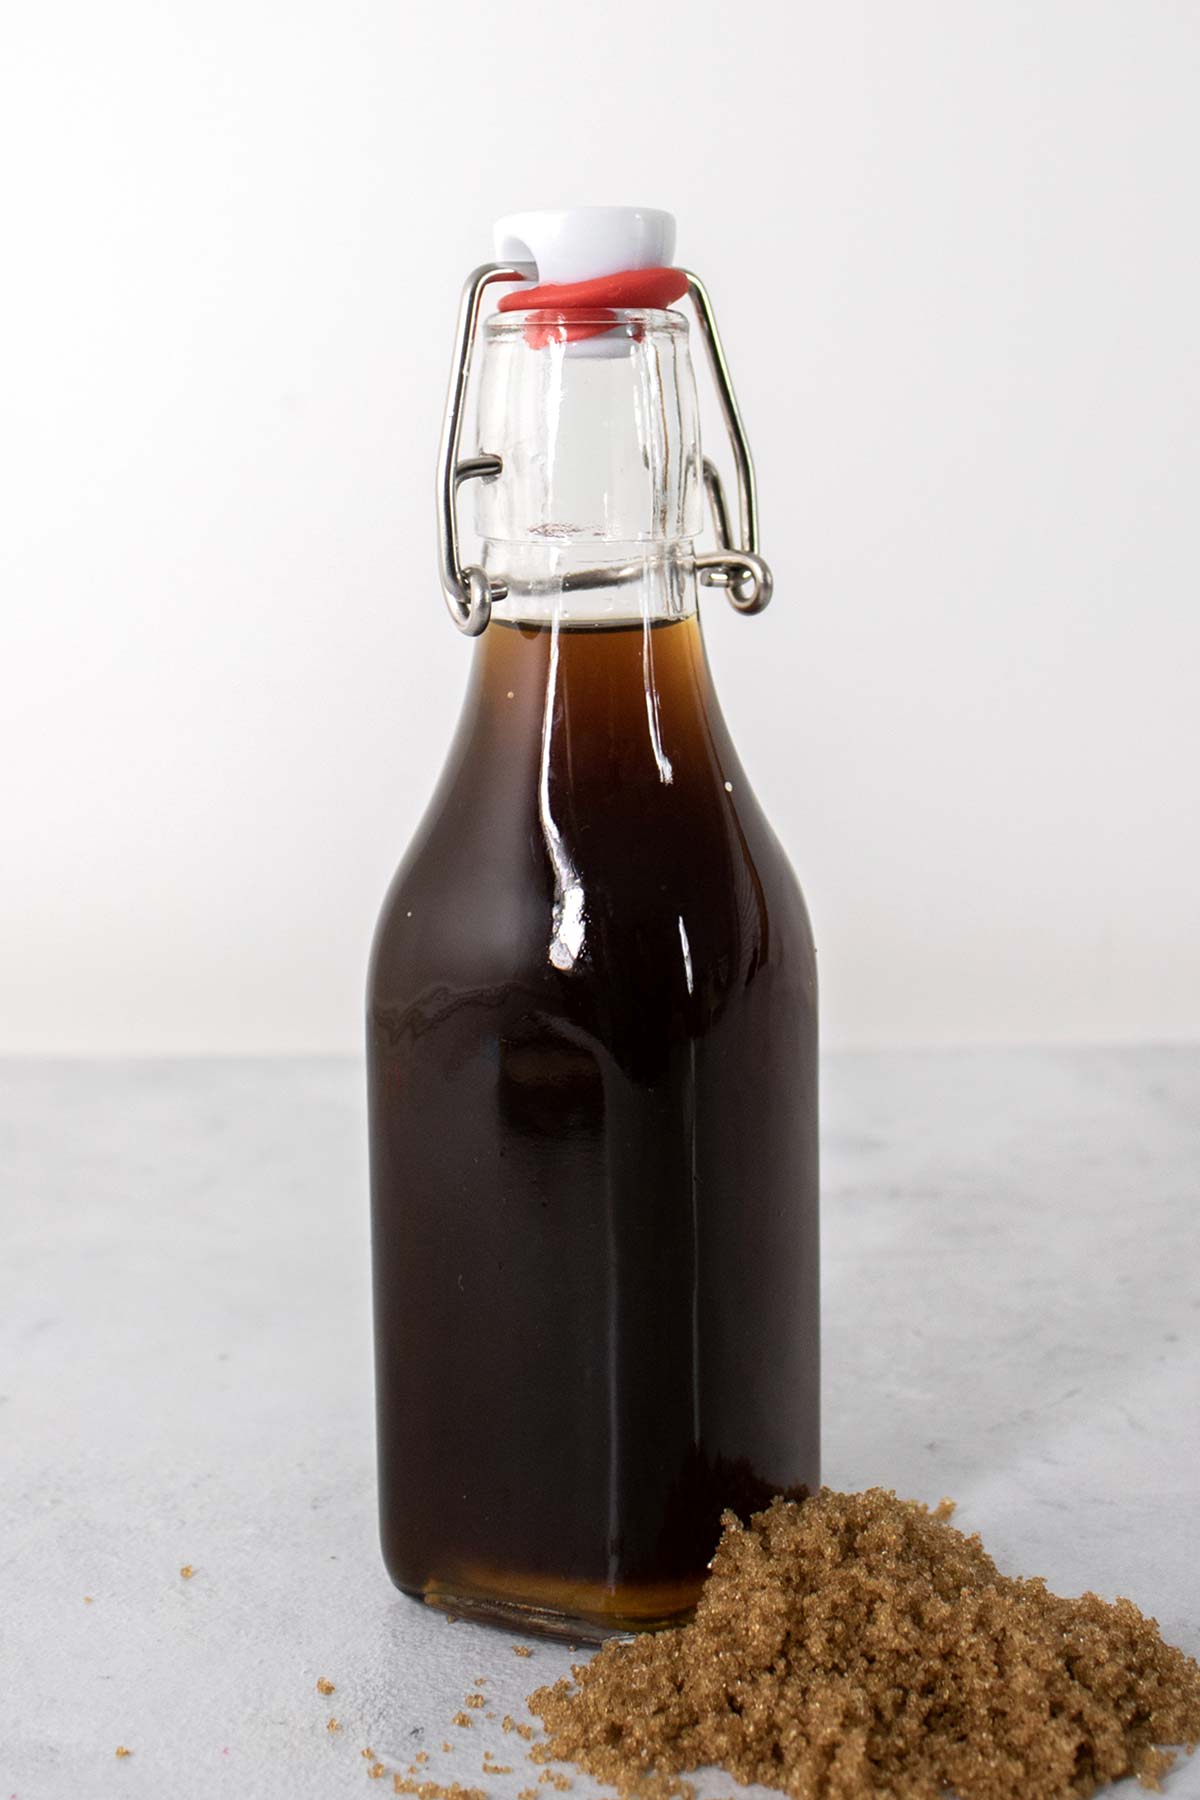 Homemade brown sugar syrup in a glass bottle.